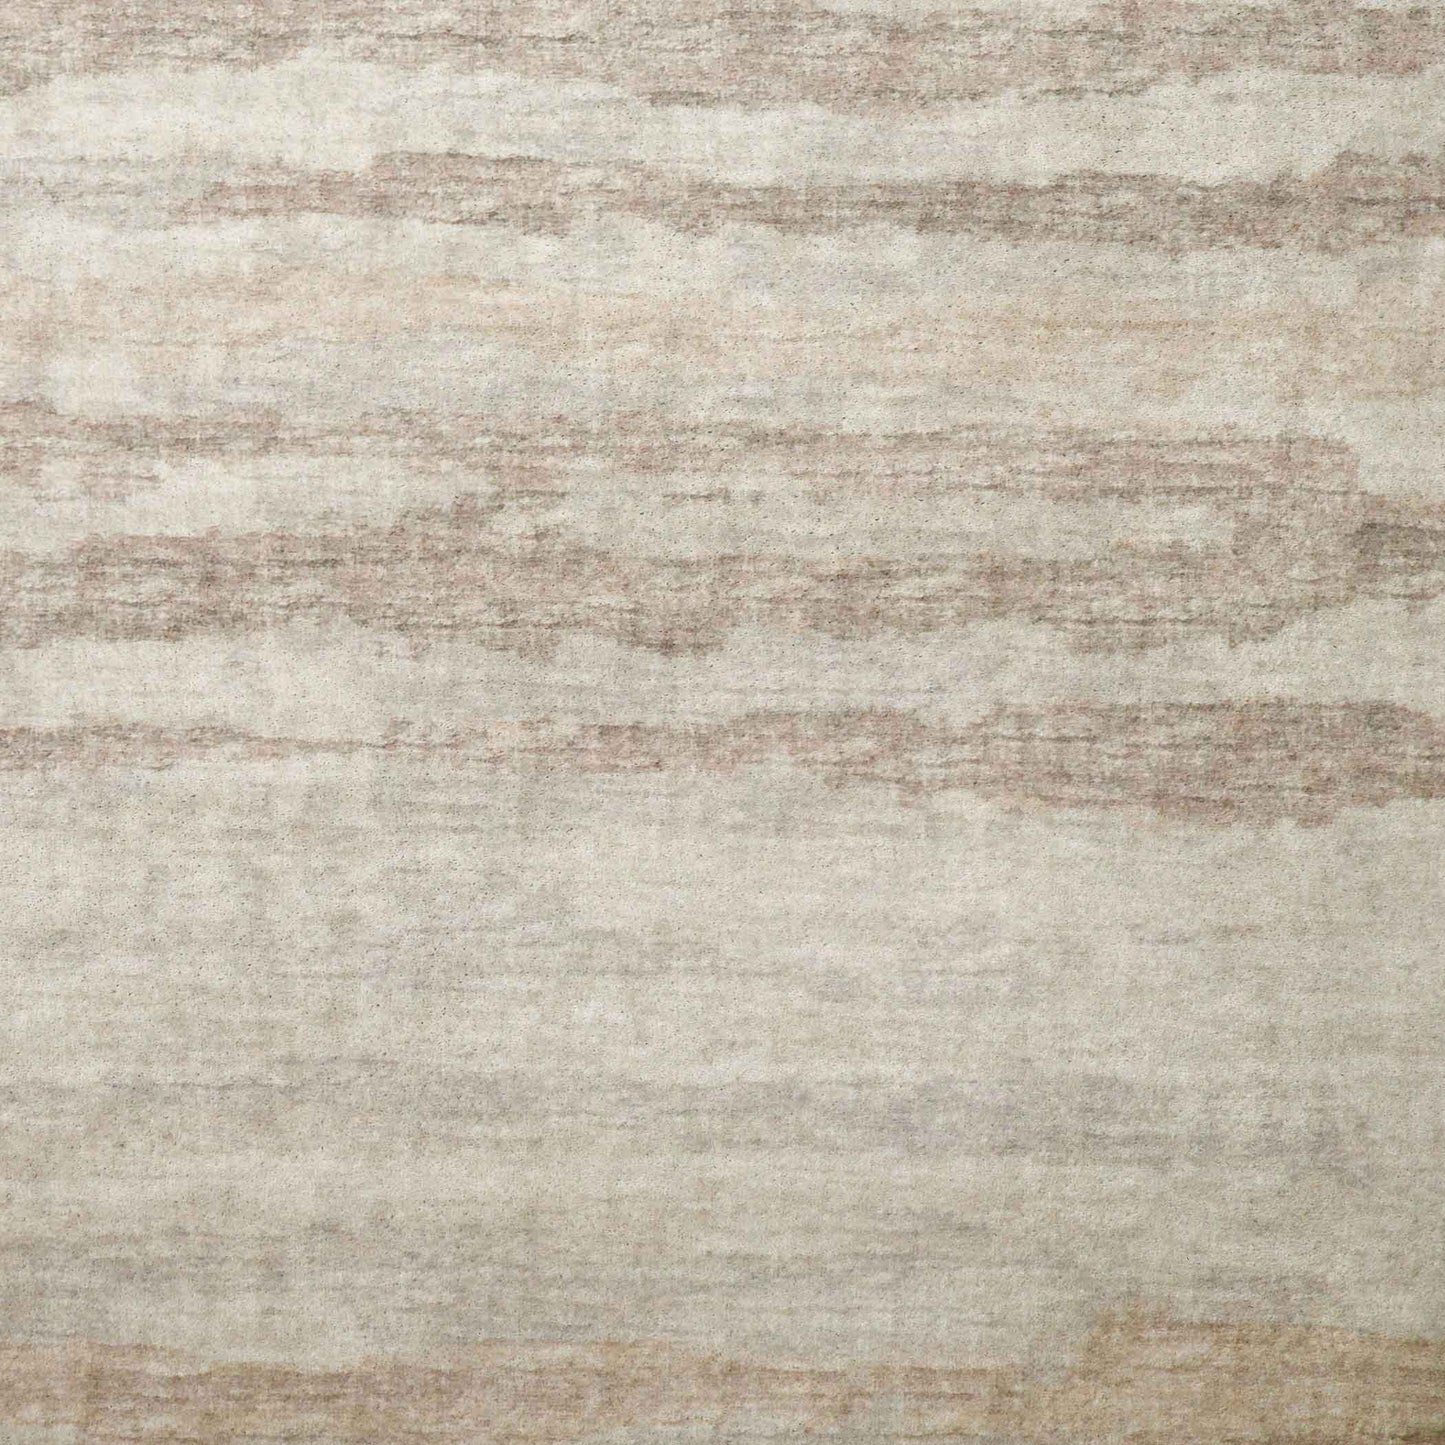 Dalyn Rugs Brisbane BR4 Linen  Contemporary Machinemade Rug